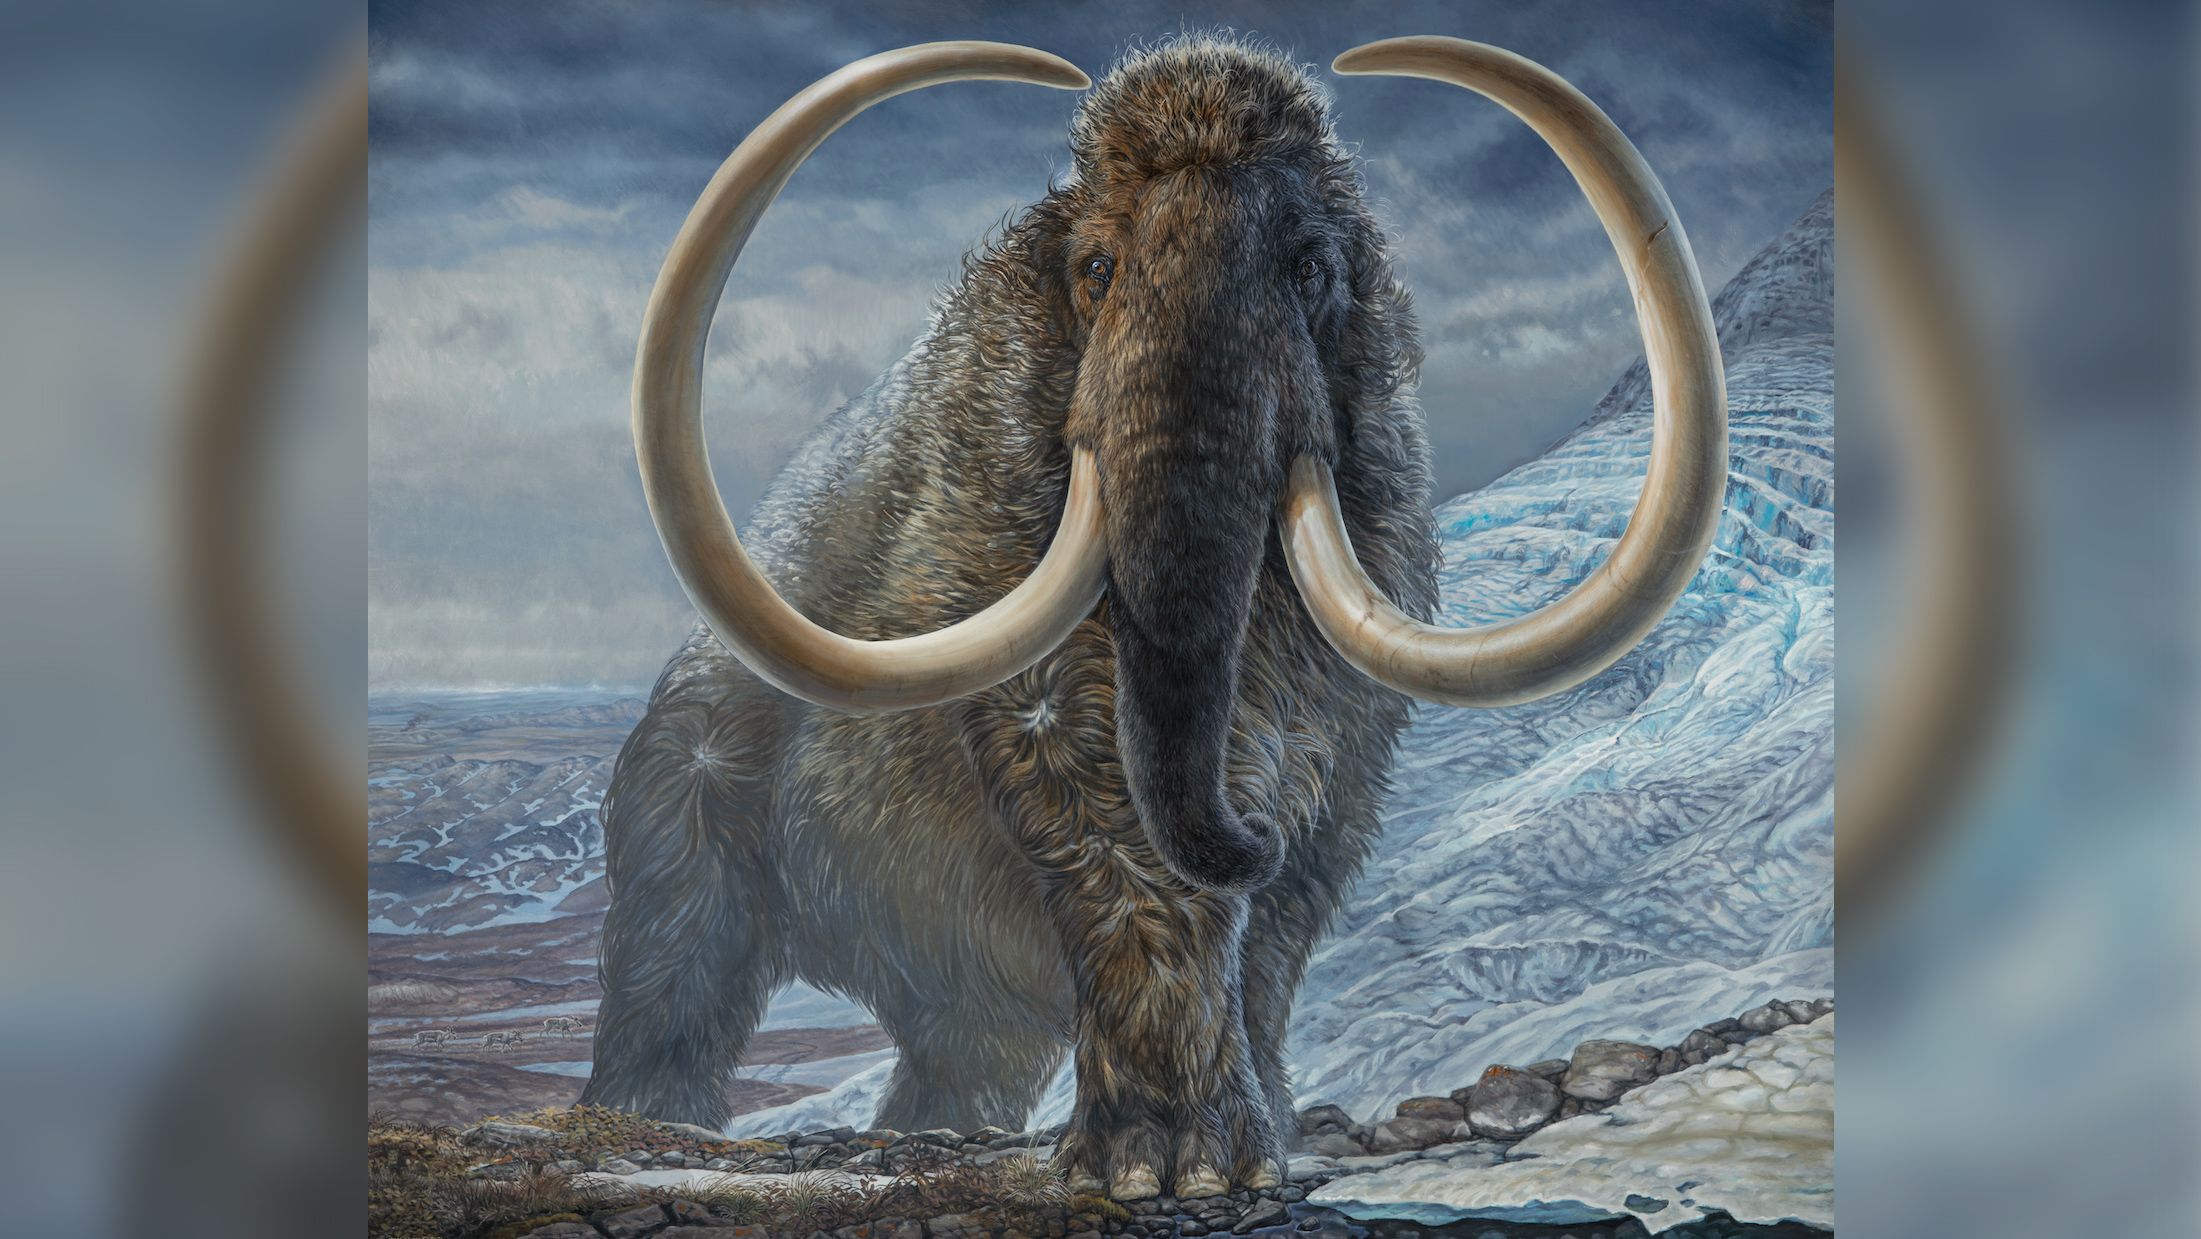 This illustration depicts an adult male woolly mammoth navigating a mountain pass in Arctic Alaska 17,100 years ago. The image is produced from an original, life-size painting by paleo artist James Havens that is housed at the University of Alaska Museum of the North.